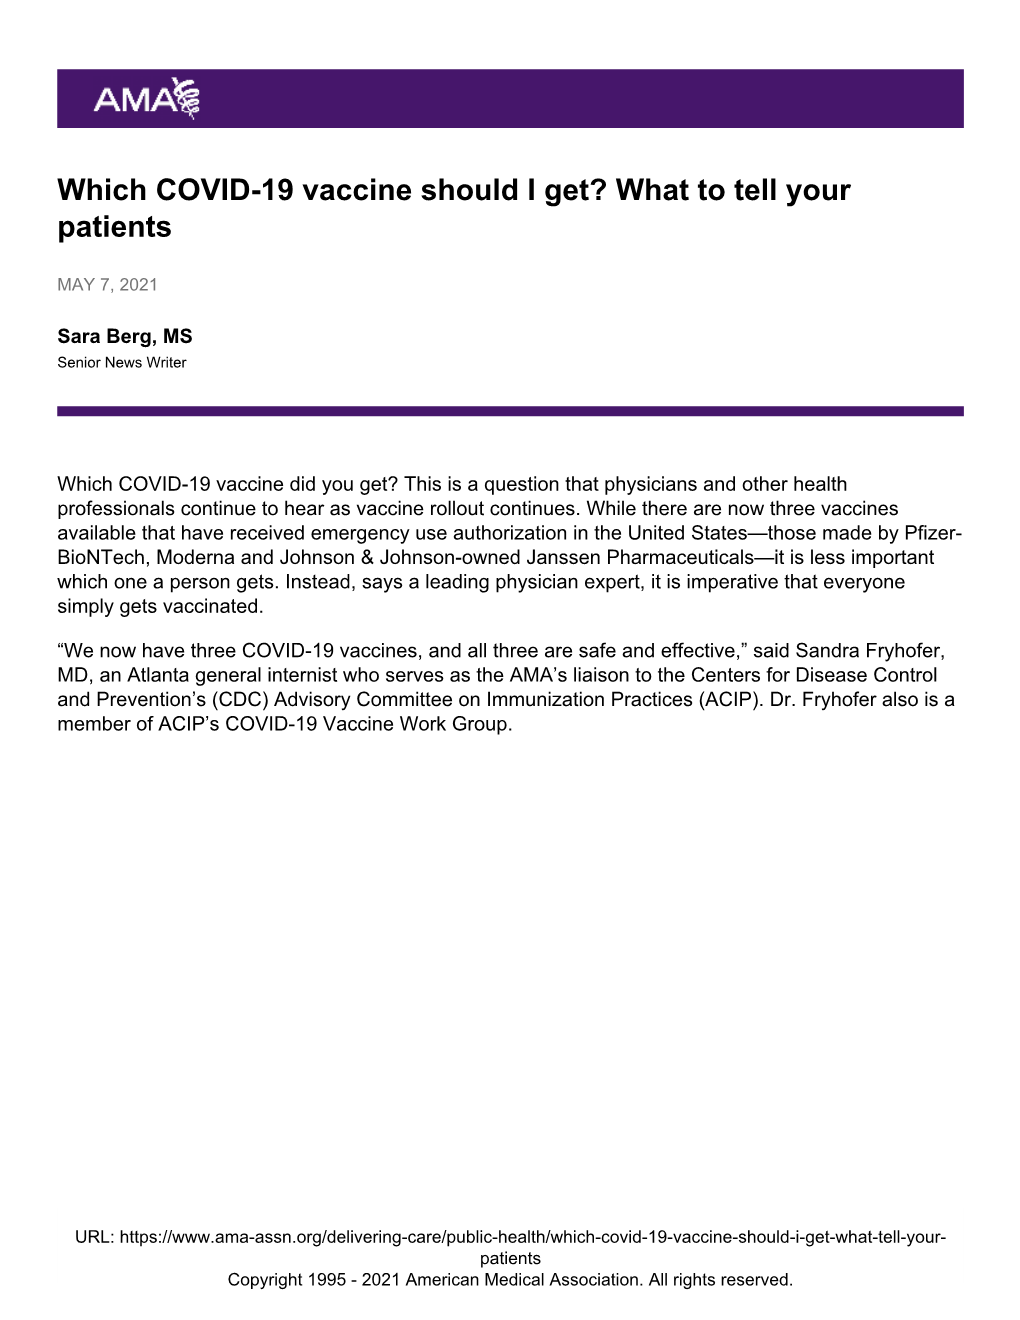 Which COVID-19 Vaccine Should I Get? What to Tell Your Patients